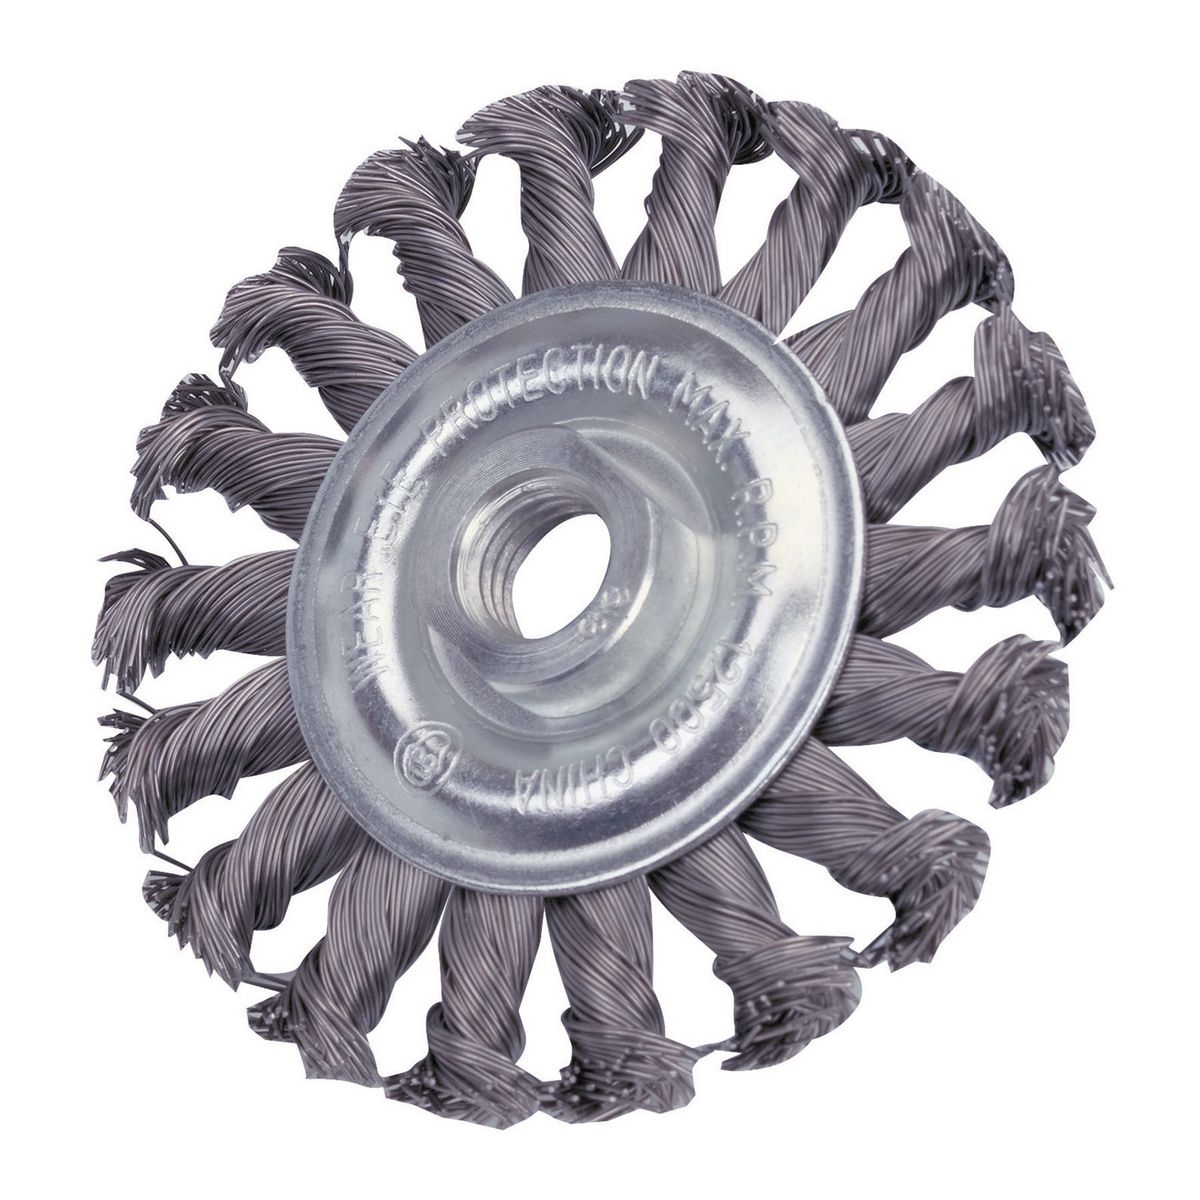 WARRIOR 4 in. Carbon Steel Knotted Wire Wheel - Item 91278 / 60487